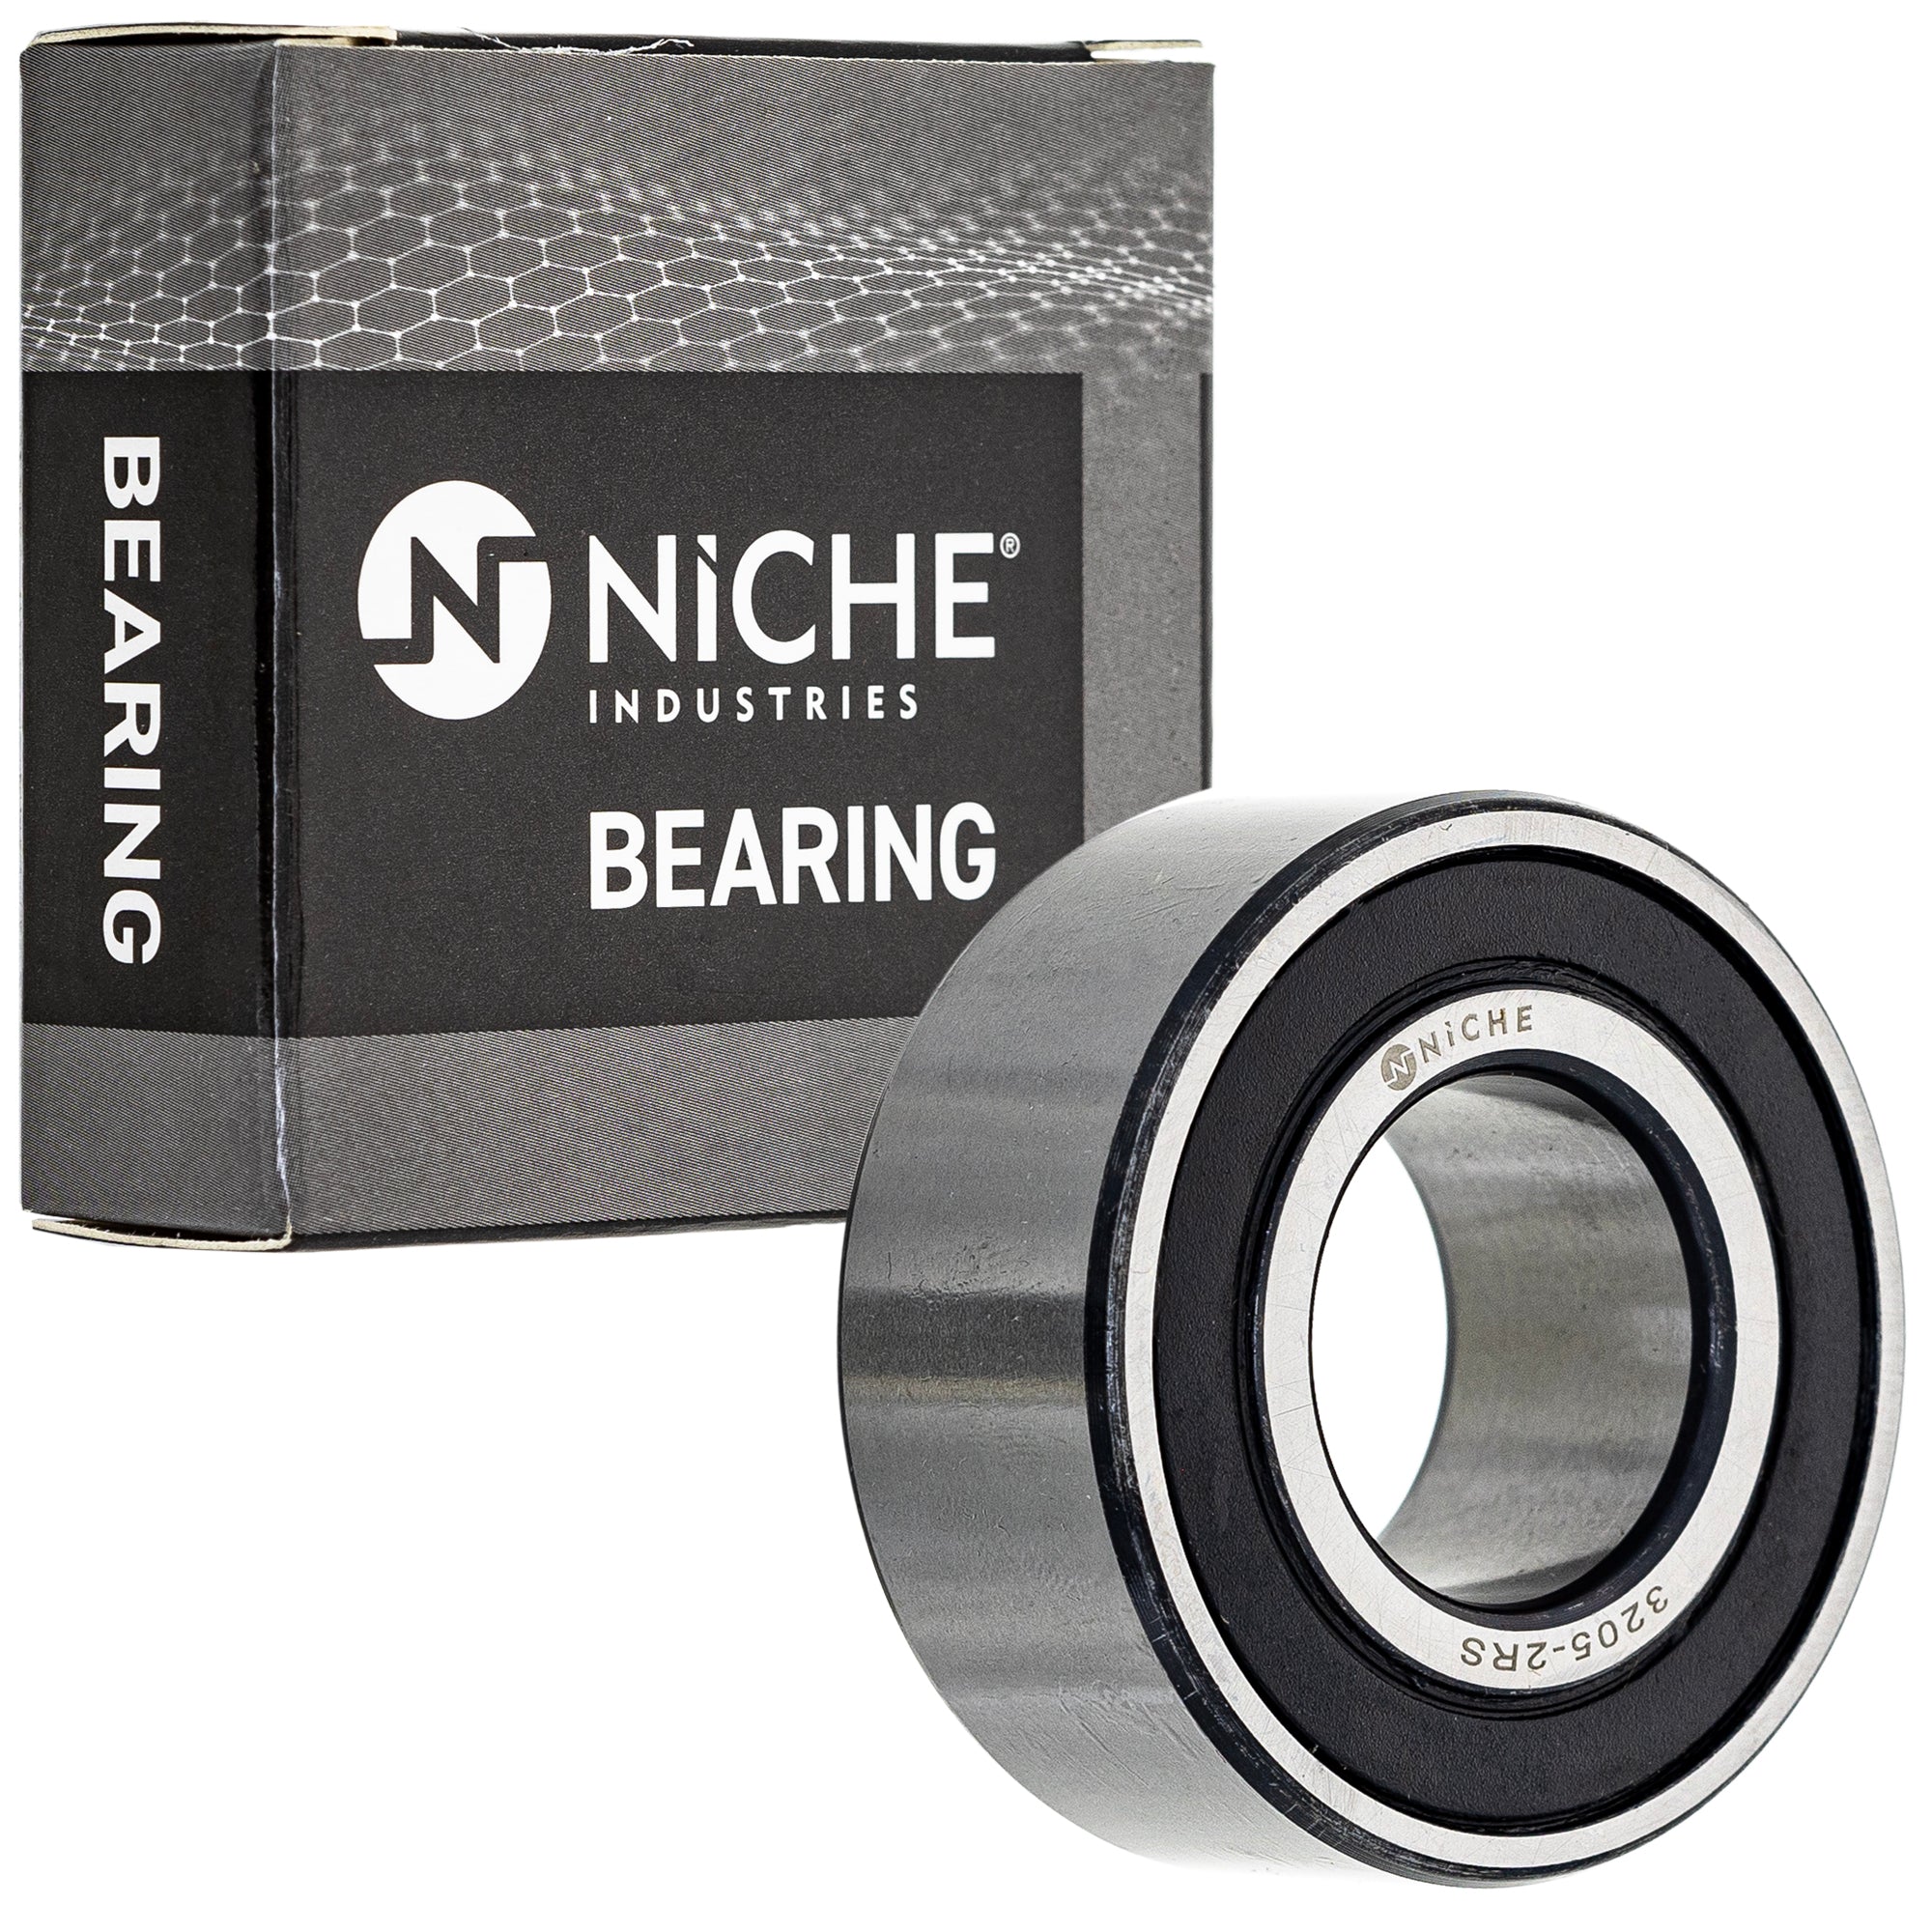 NICHE 519-CBB2284R Bearing 10-Pack for zOTHER R850R R1150GS R1100RS